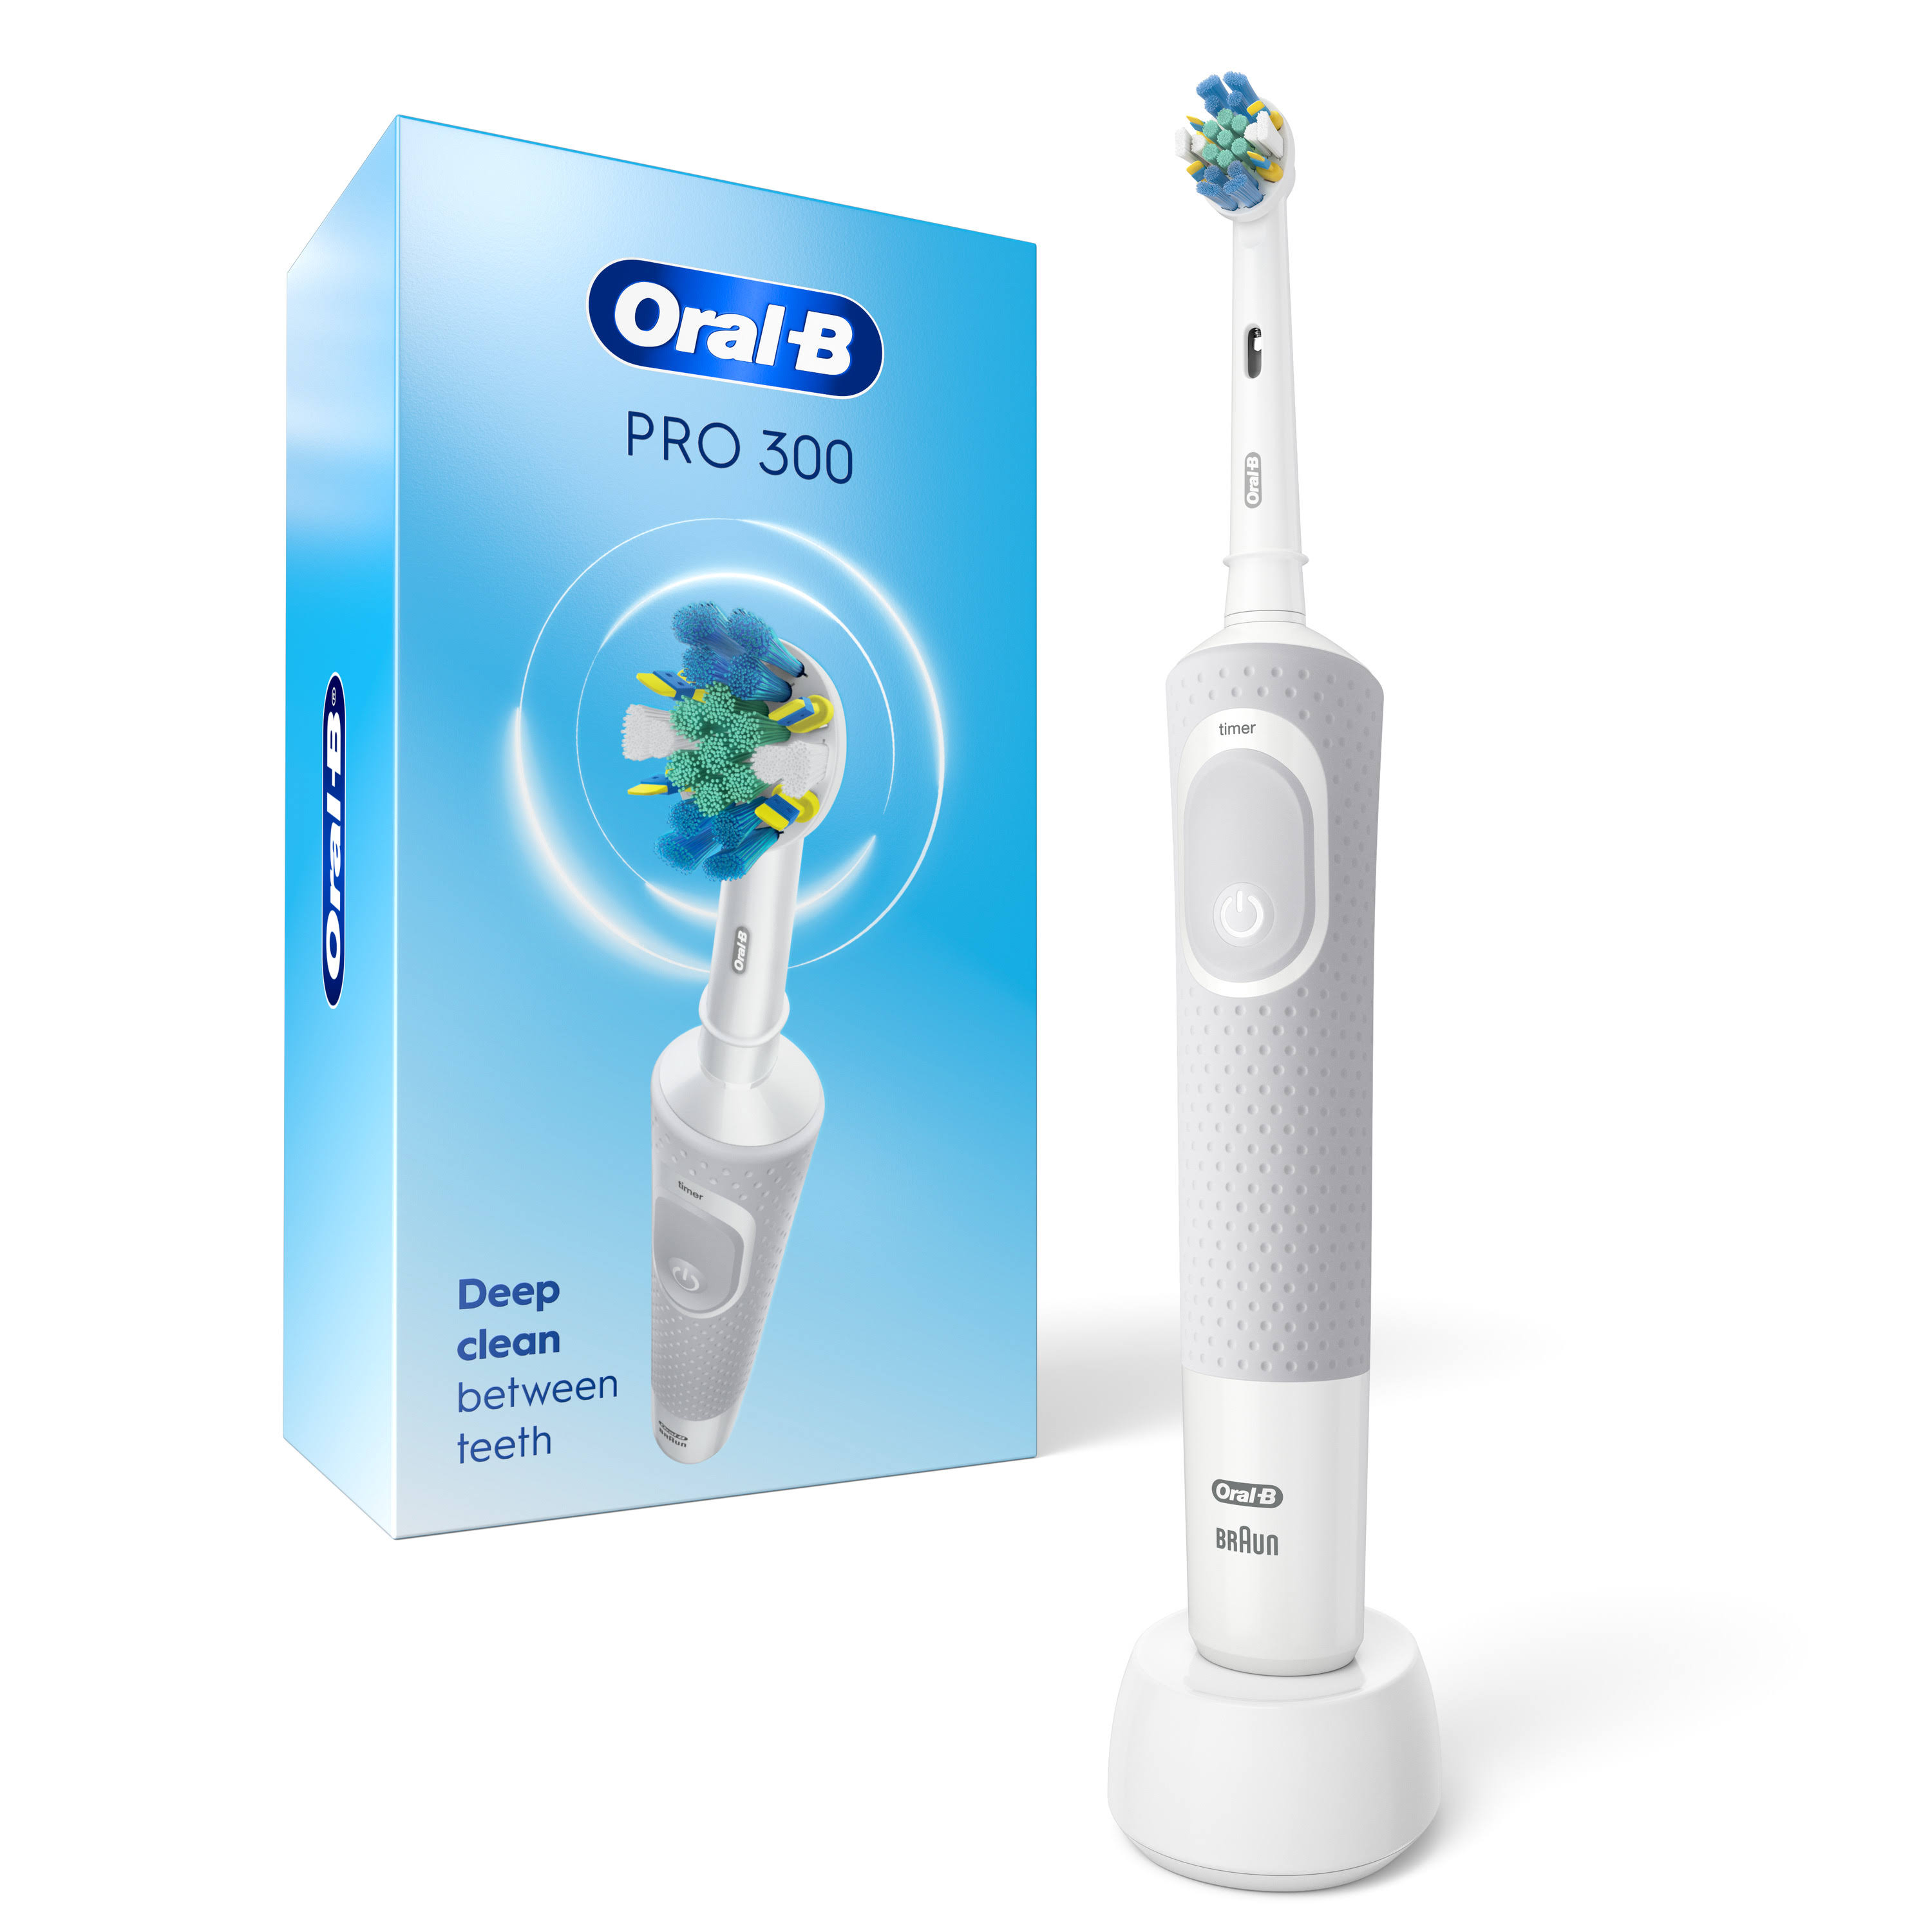 Oral B Pro 300 Floss Action Vitality Electric Toothbrush with (1) Brush Head, Rechargeable, White